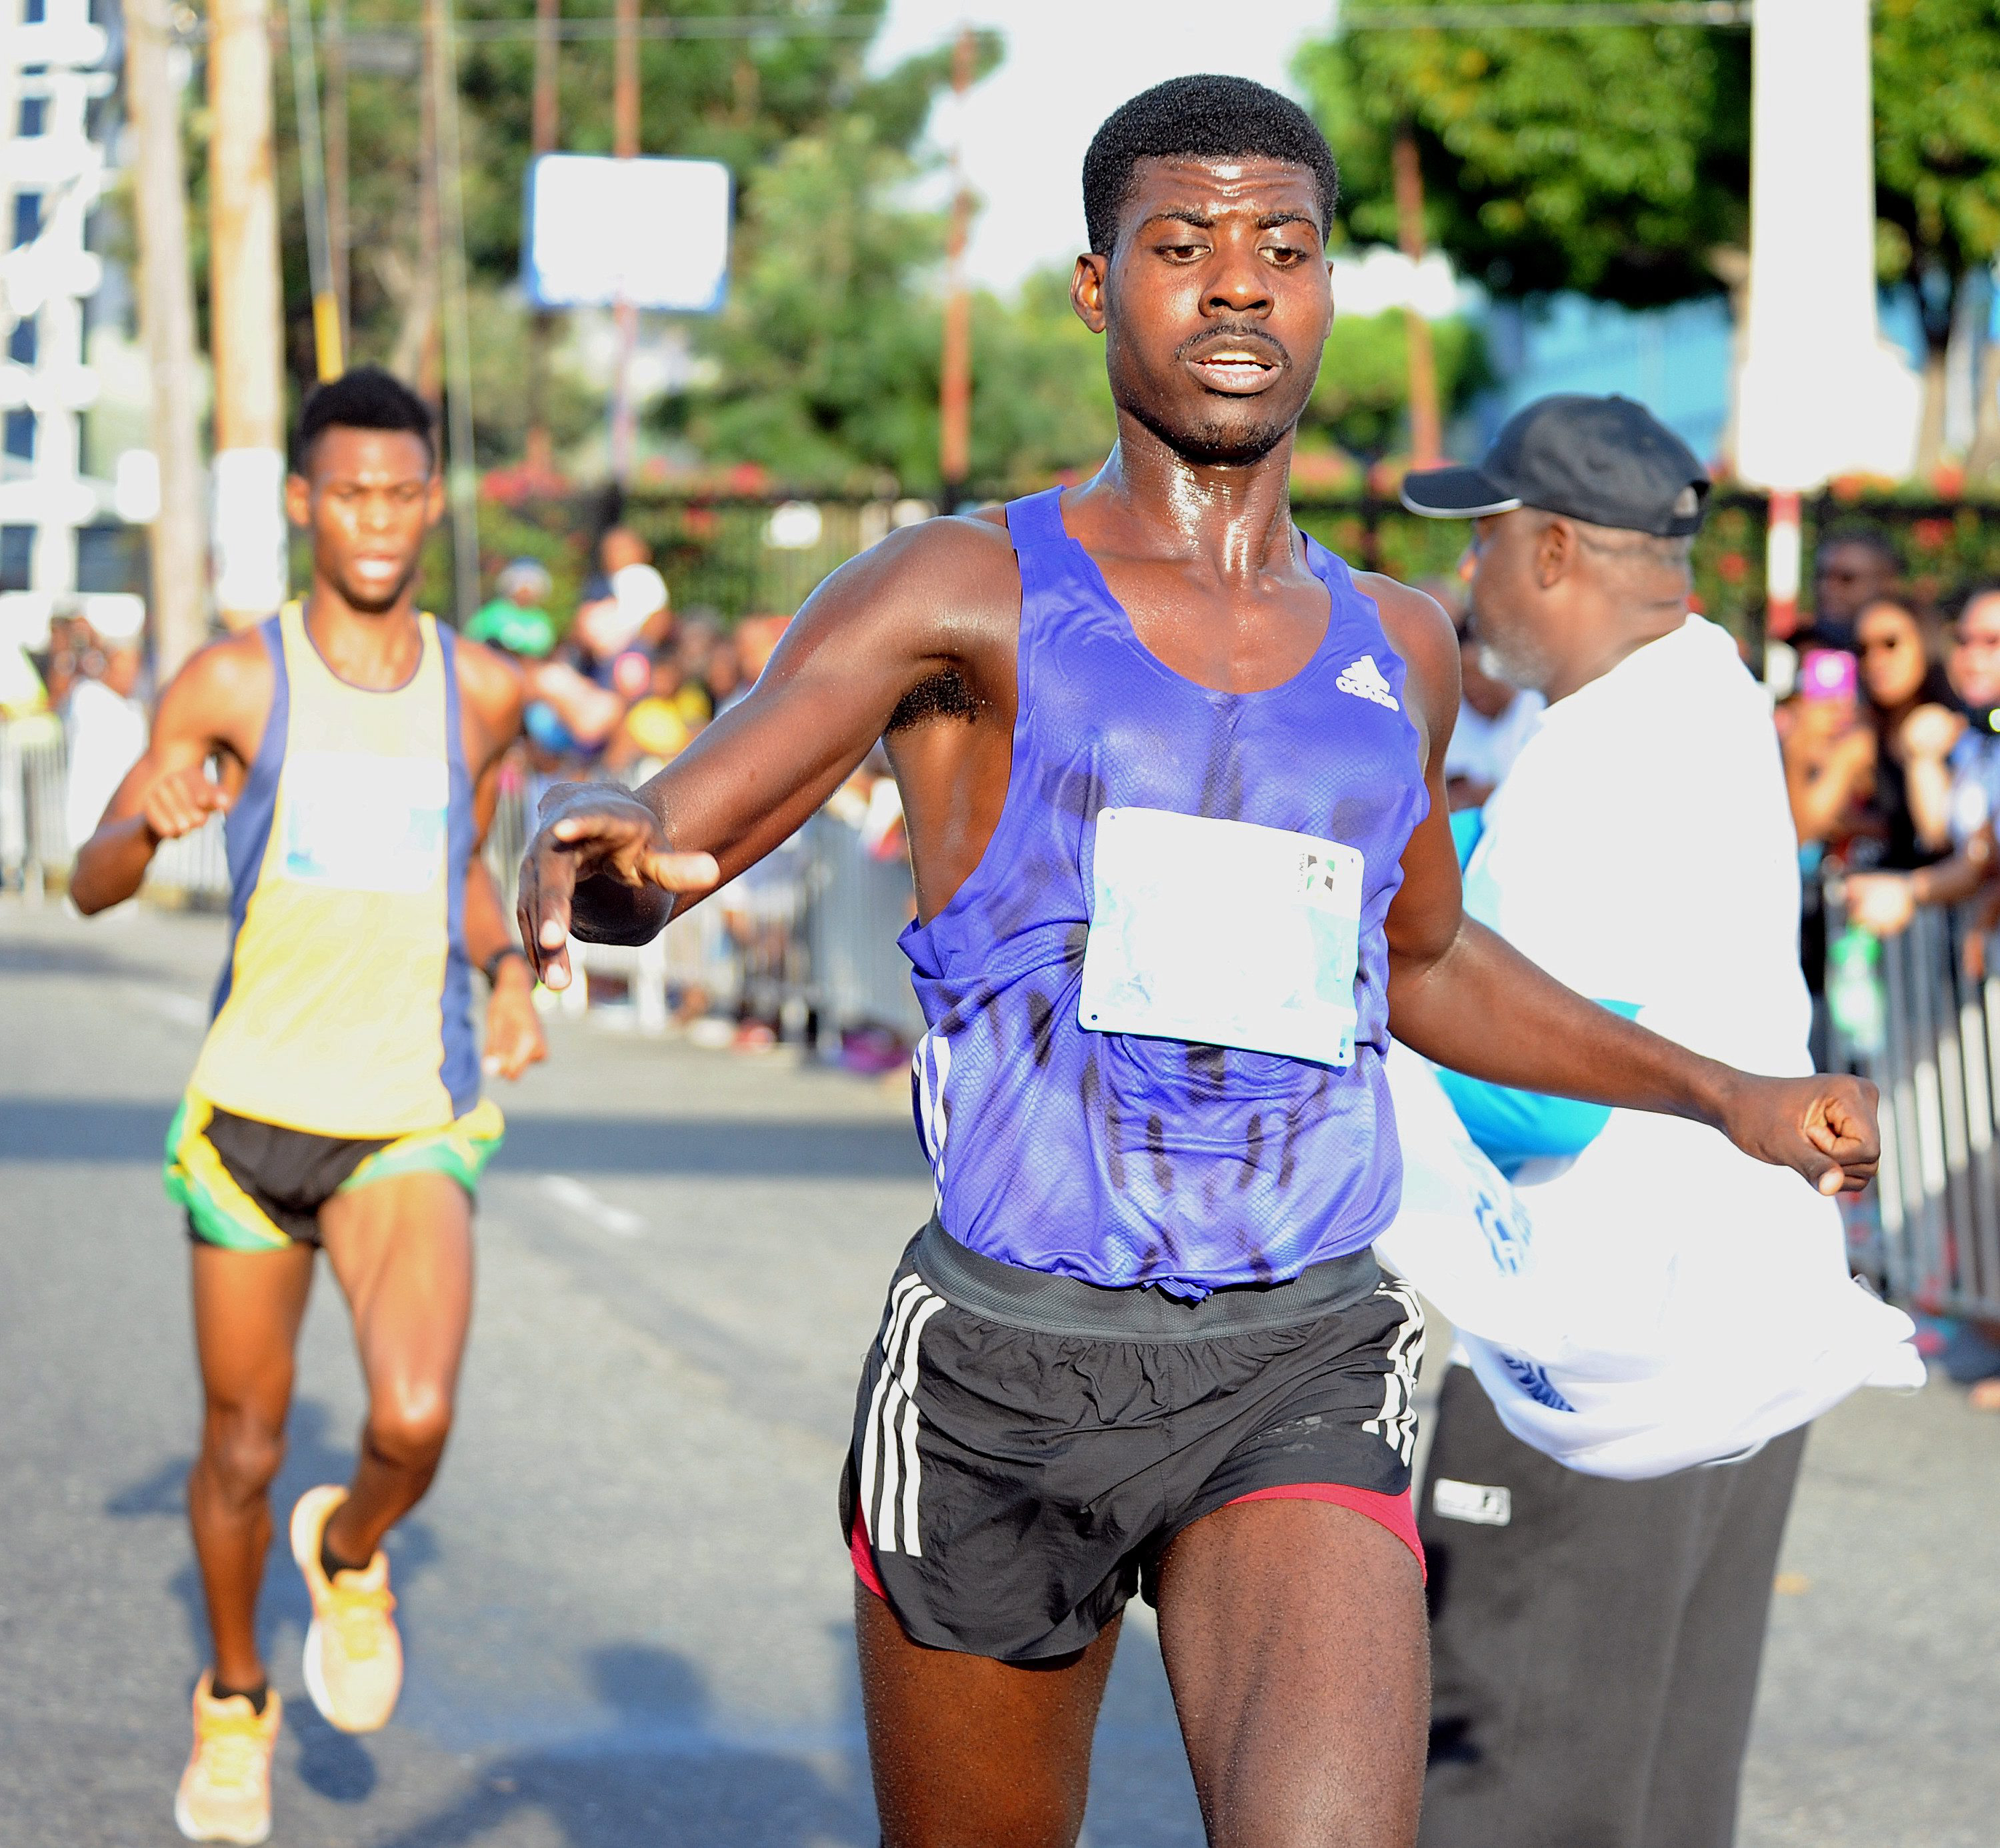 Two records on opening day of NCB InterCol